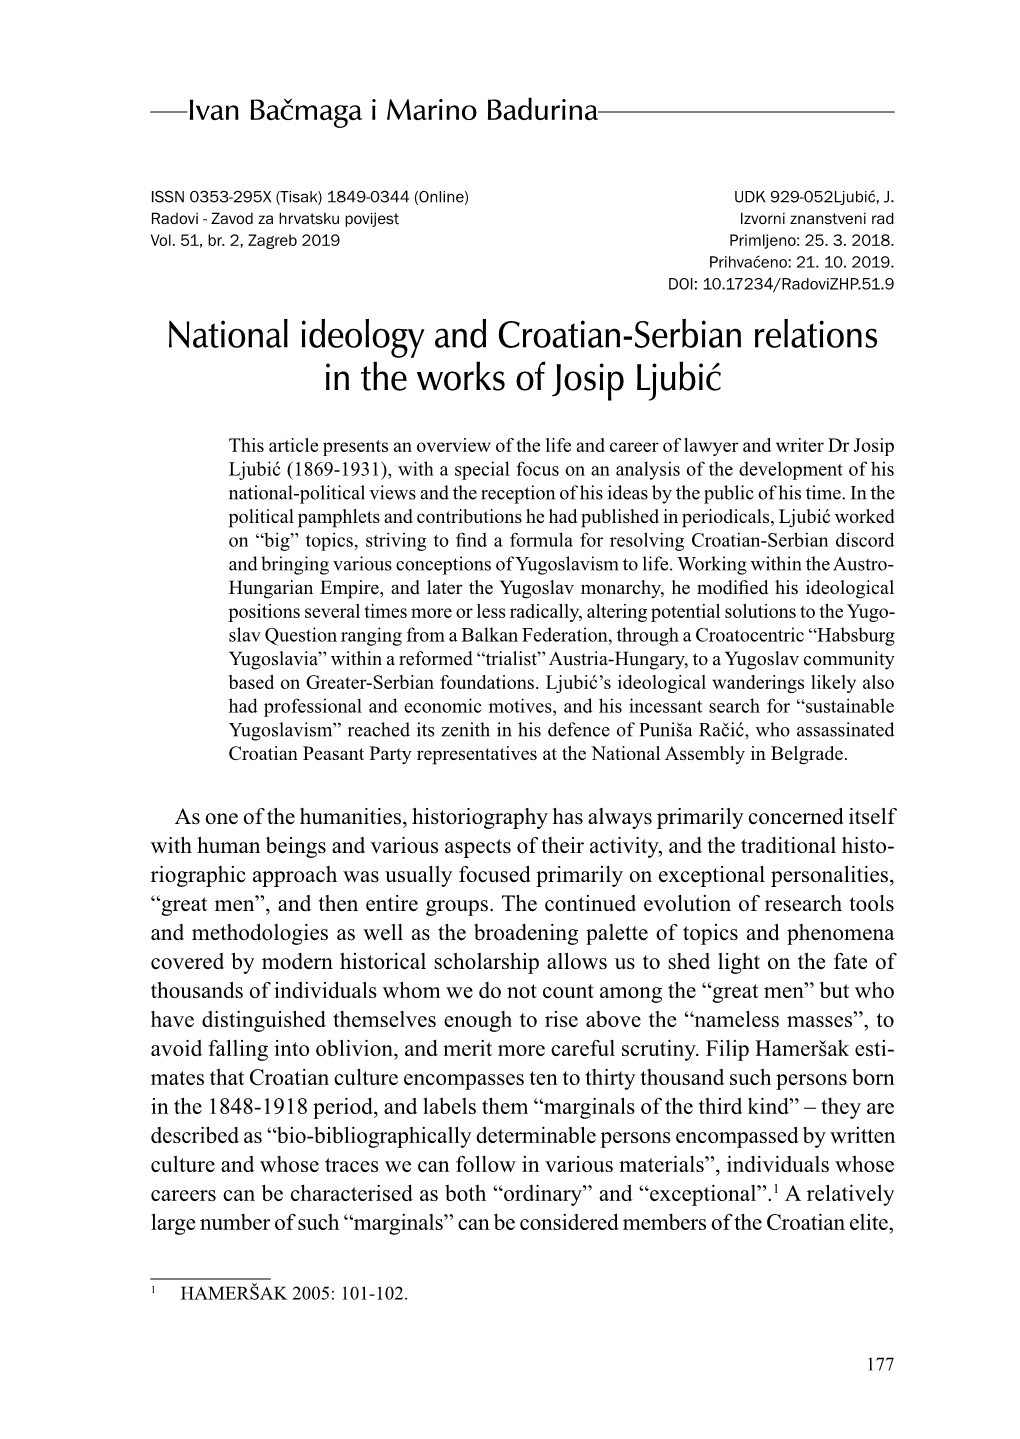 National Ideology and Croatian-Serbian Relations in the Works of Josip Ljubić